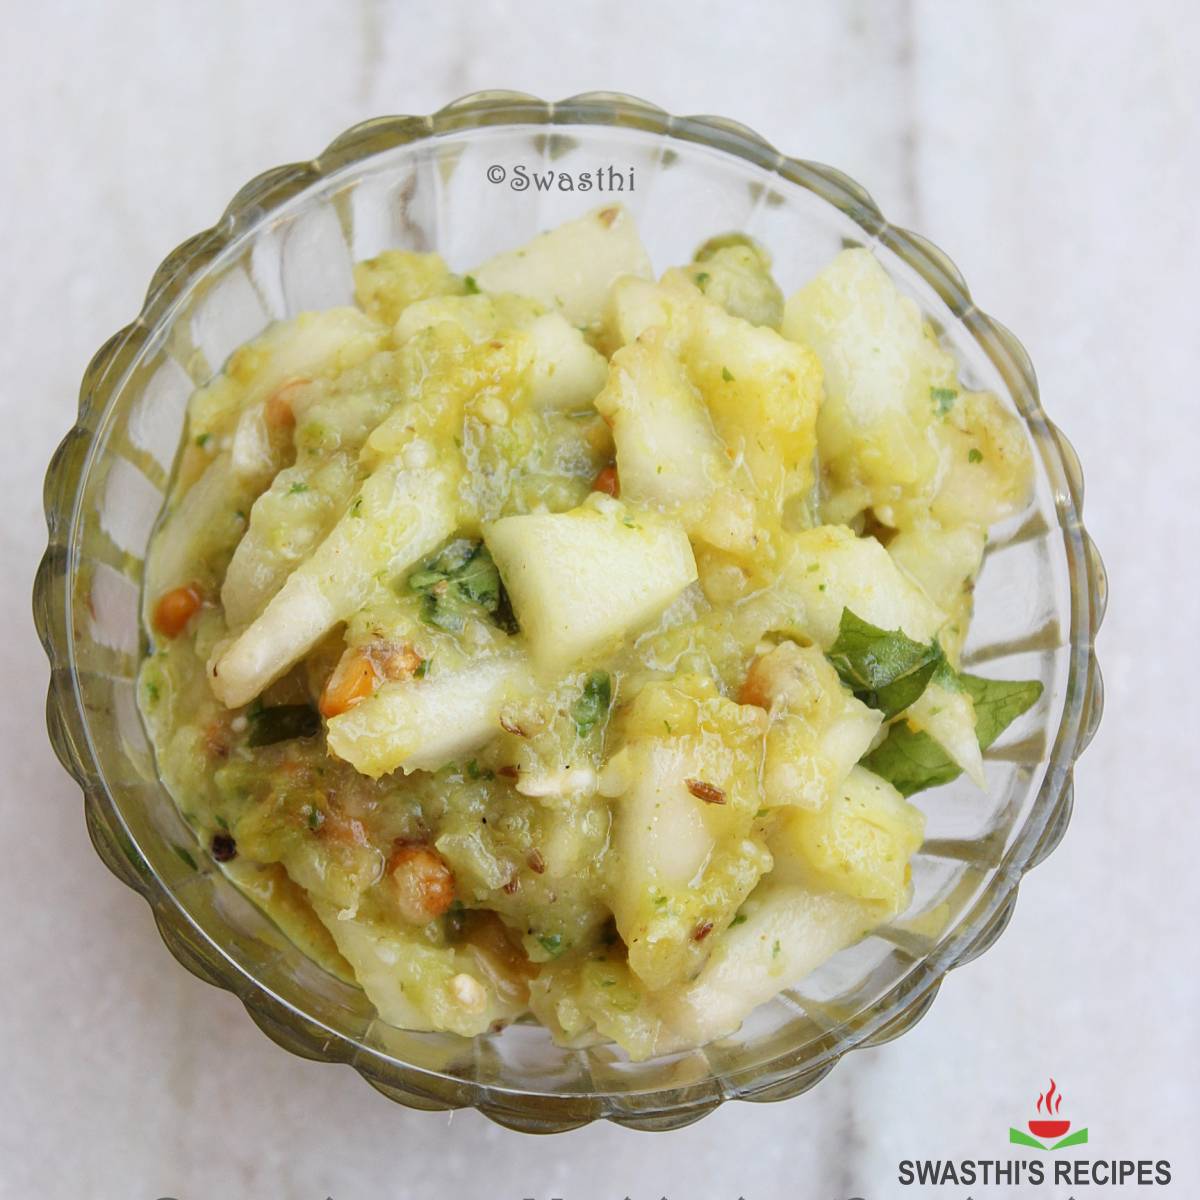 How to make cucumber chutney in andhra style